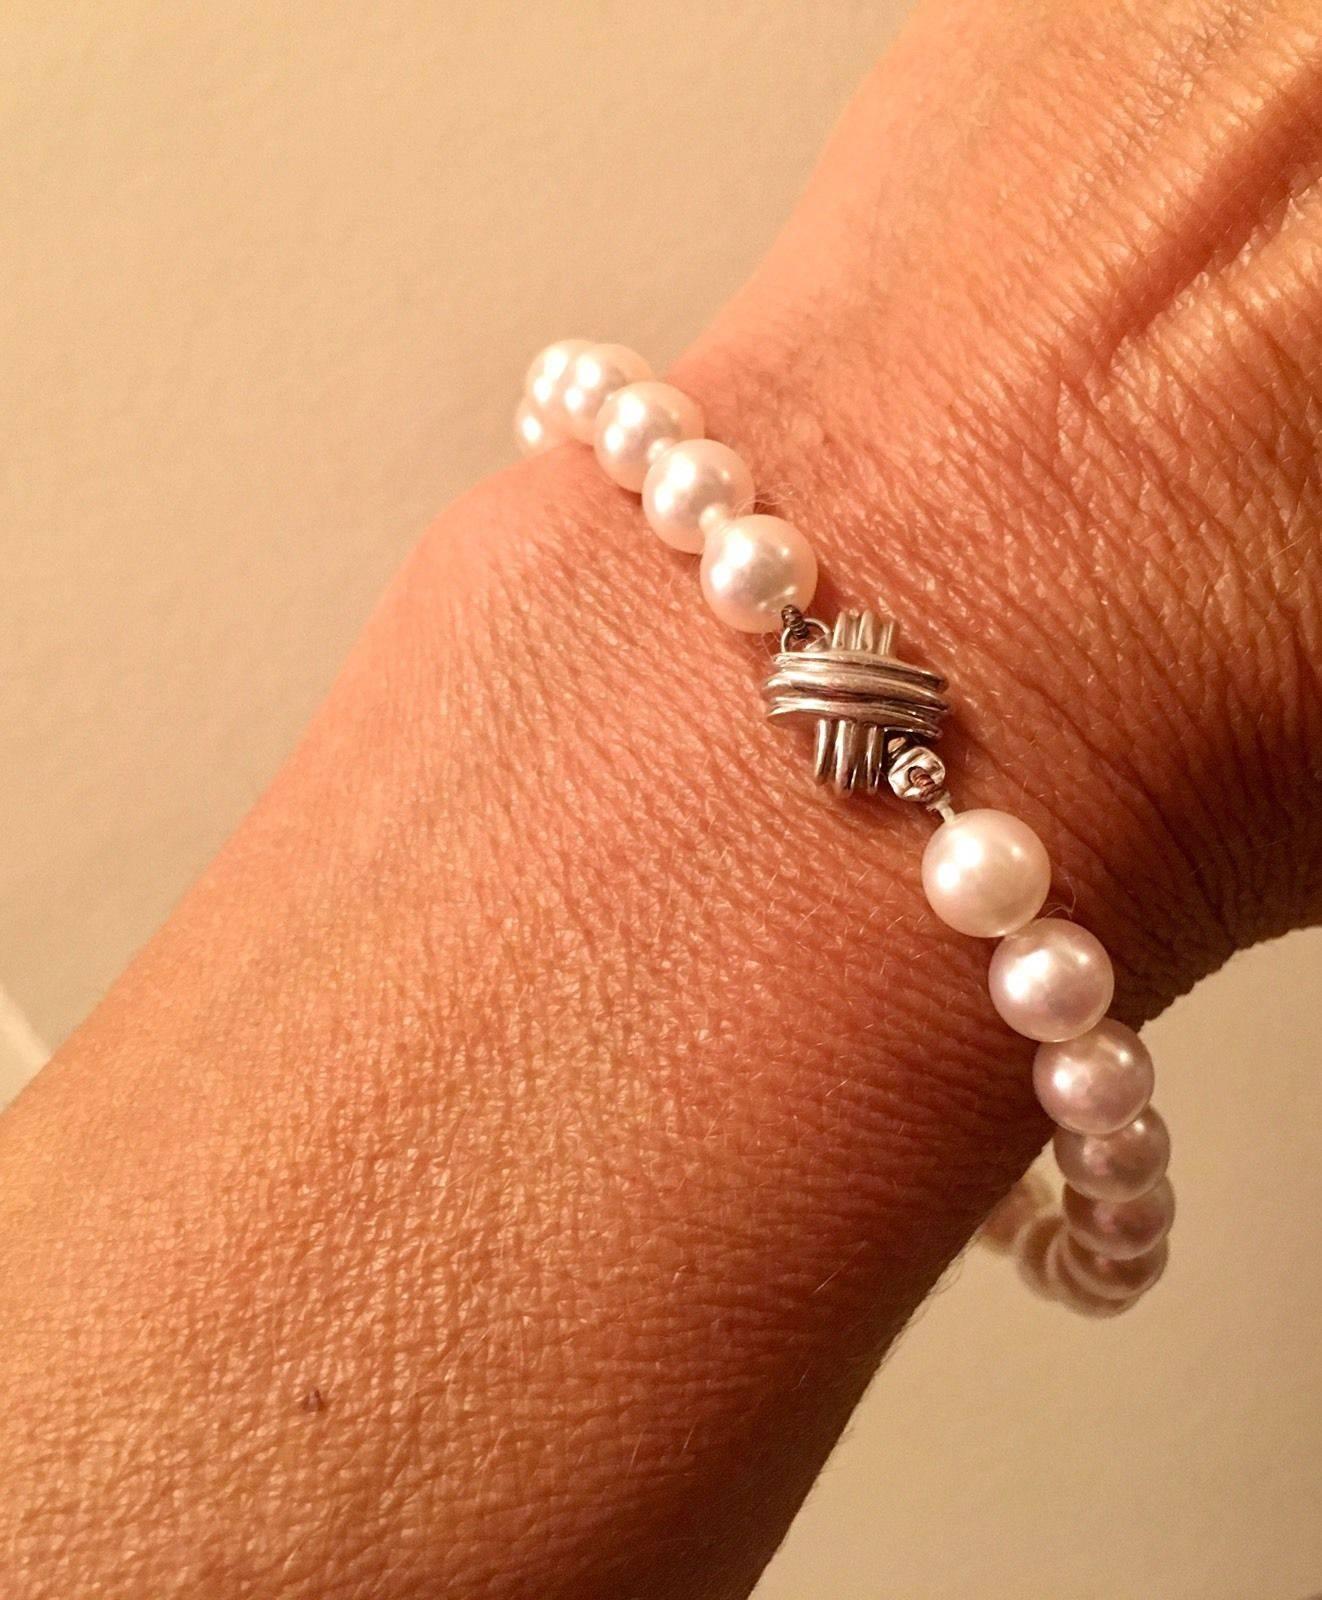 Stunning 18k white gold Tiffany & Co. high grade cultured pearl bracelet, set with the iconic signature x clasp, indicating the bracelet has pearls of the finest quality.  High metallic luster and shine, with a slight rose tint as only Tiffany